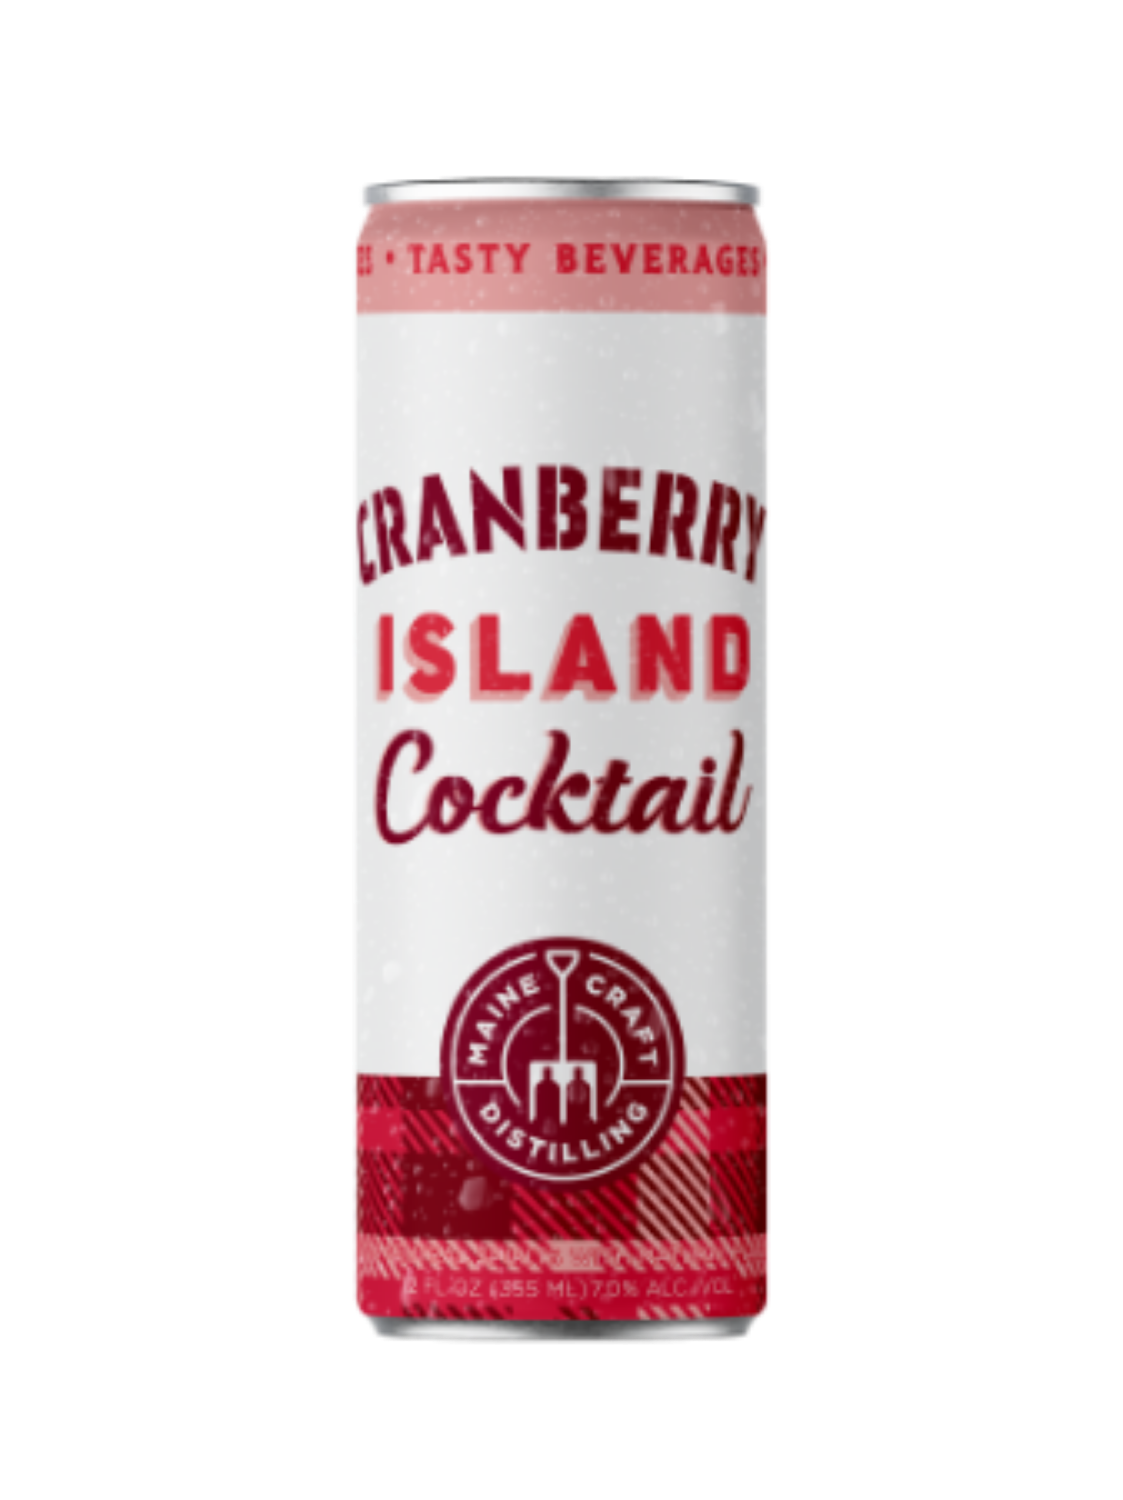 0957312 Cranberry Island Cocktail 1500 